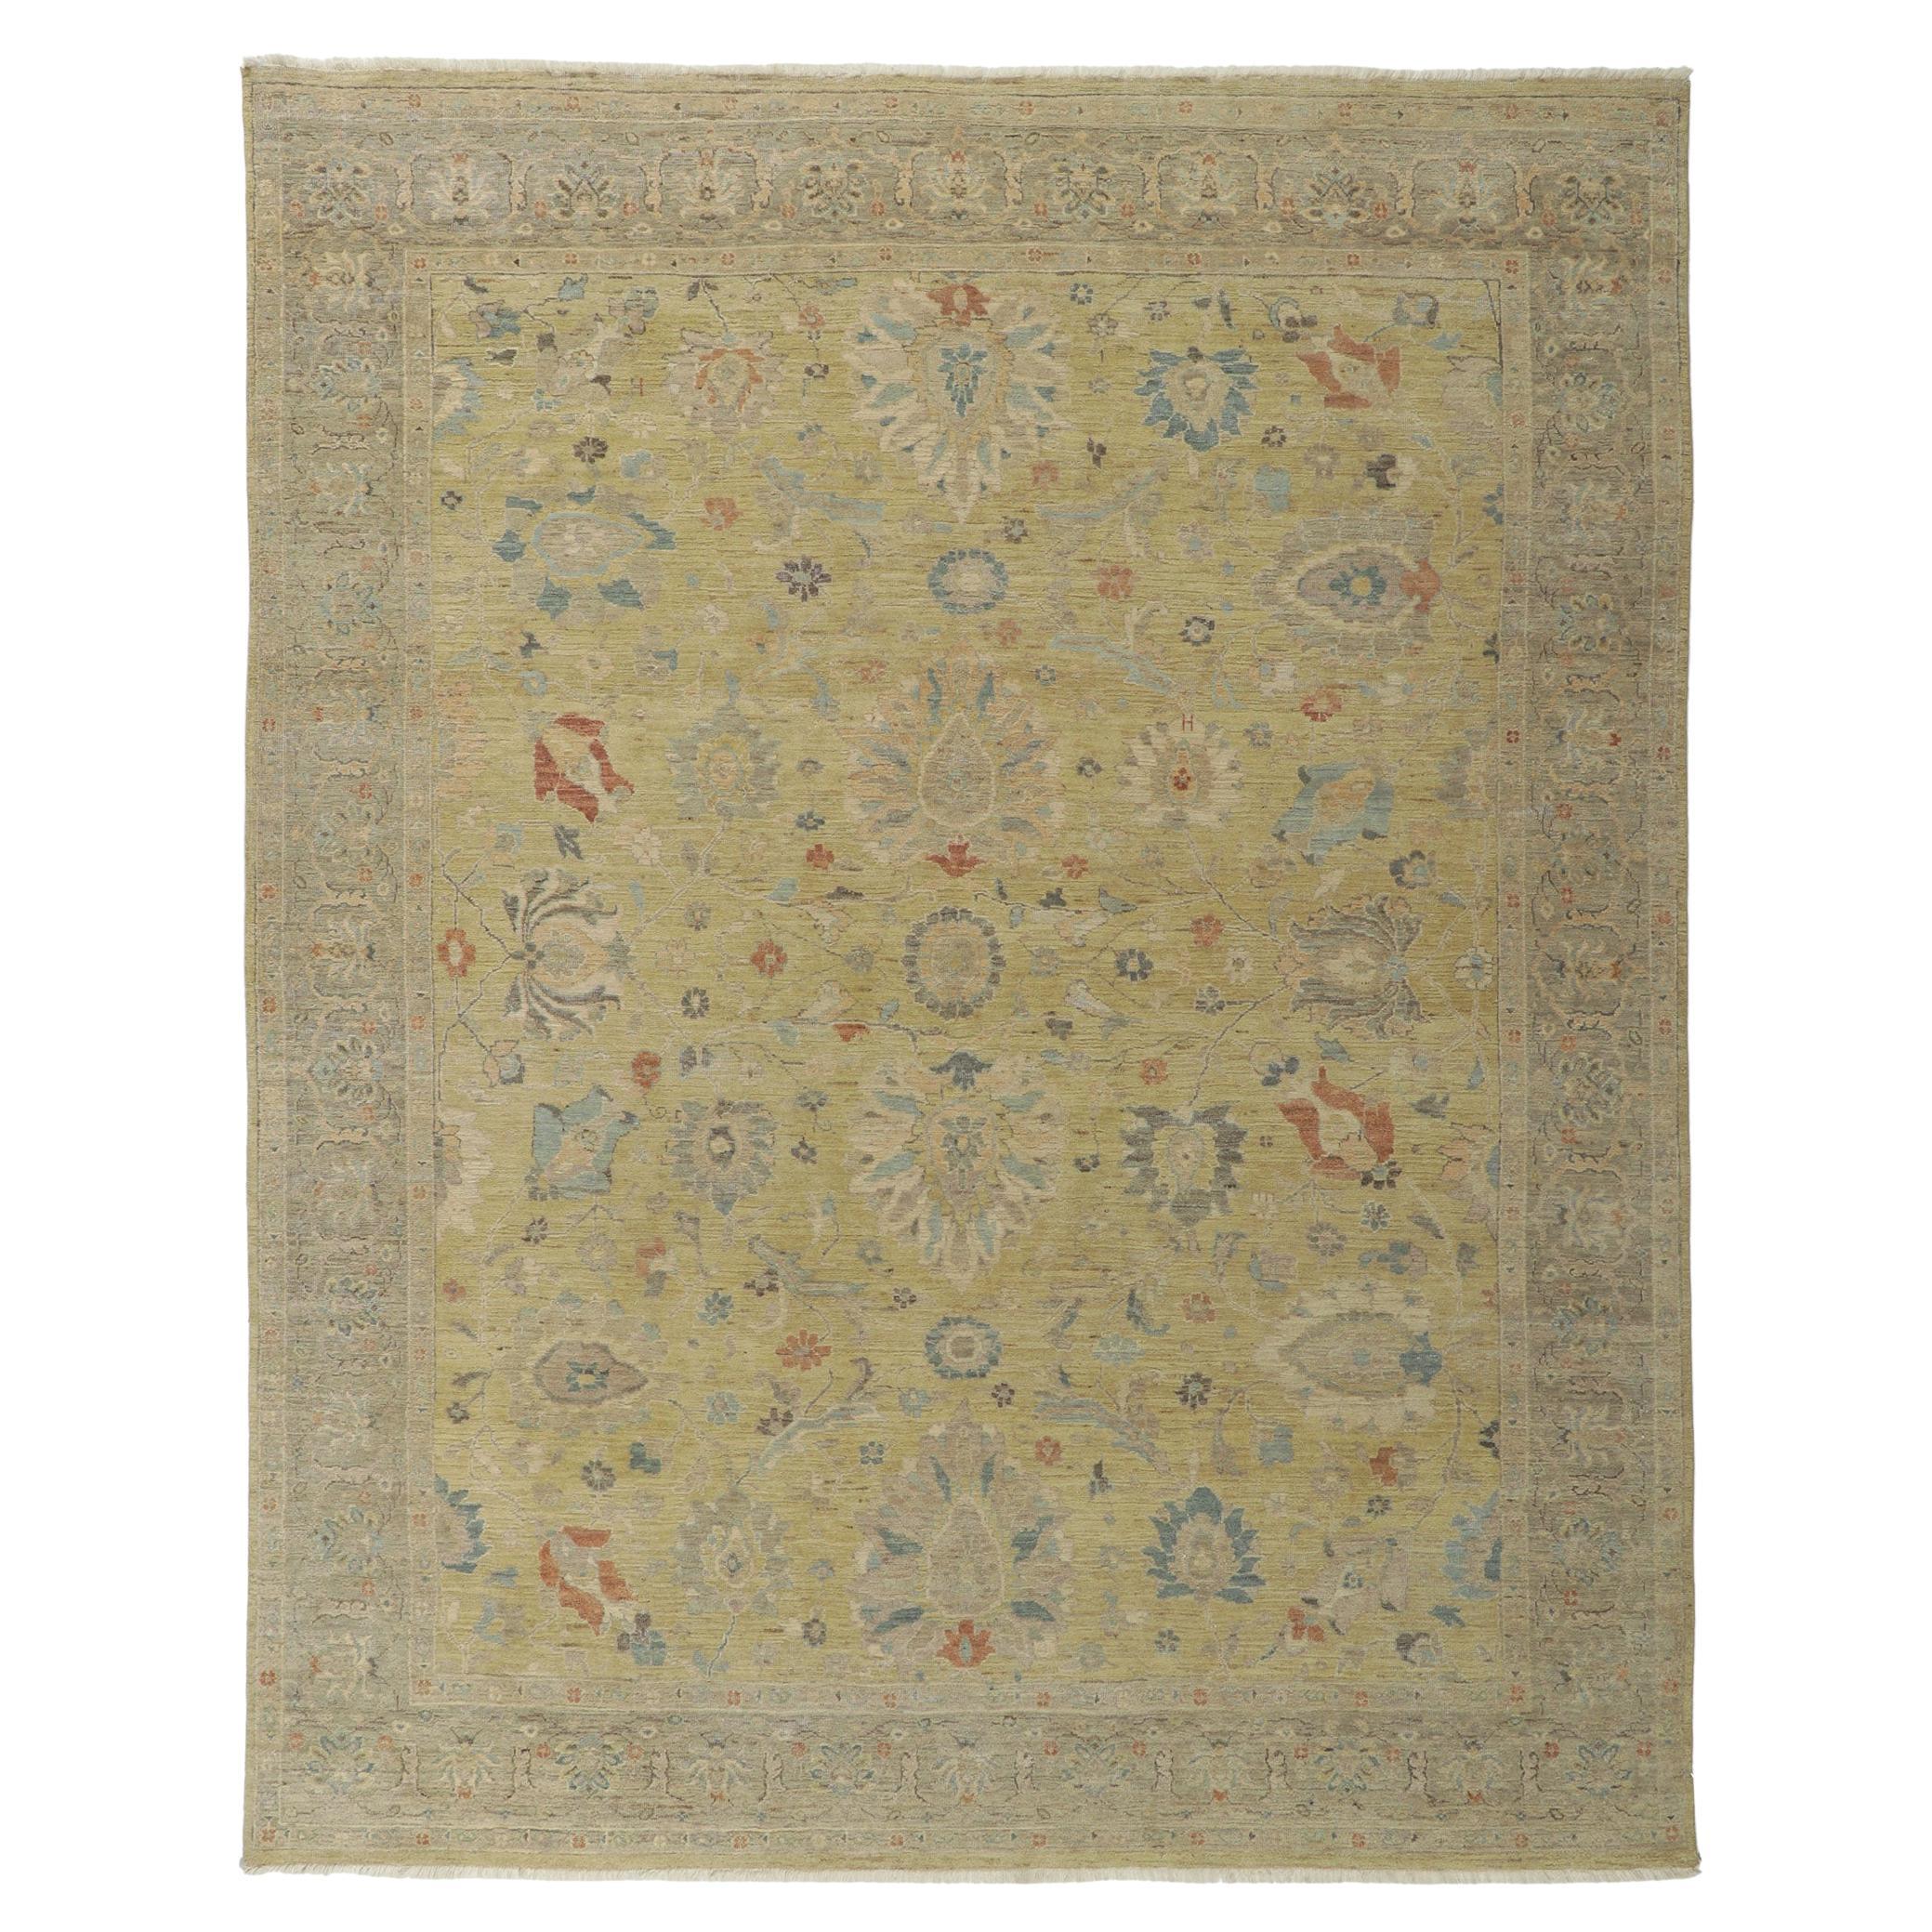 New Distressed Oushak Rug with Vintage Style